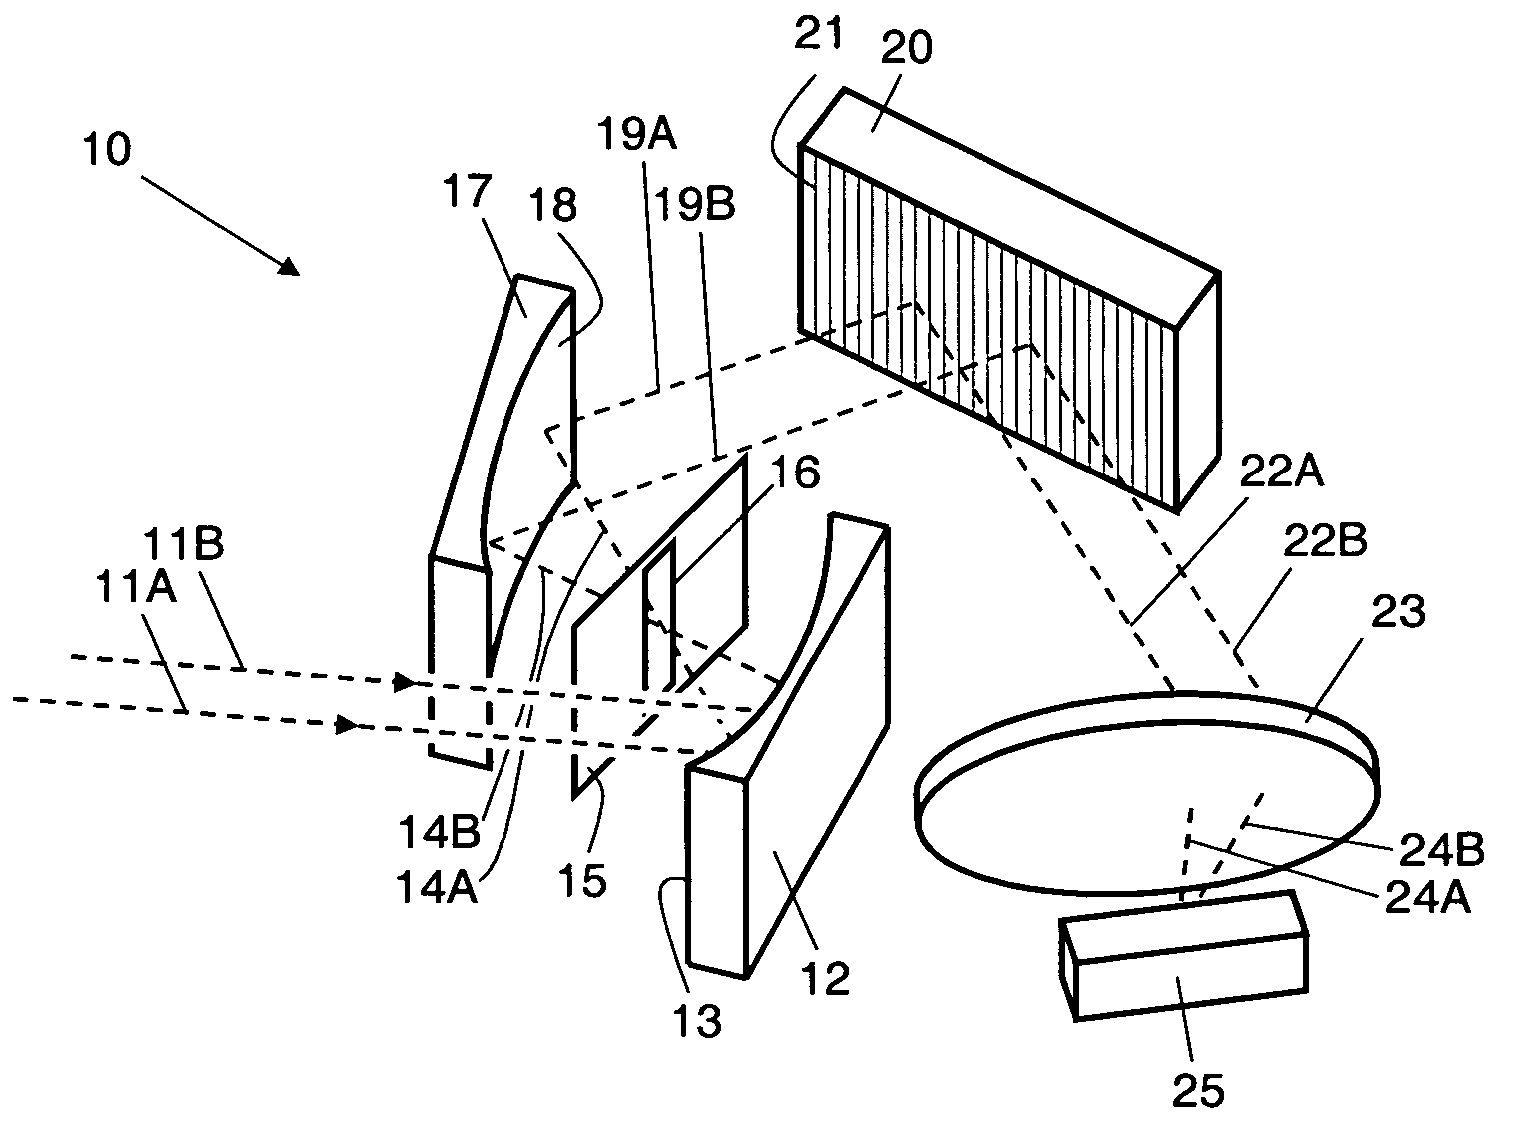 Scalable imaging spectrometer